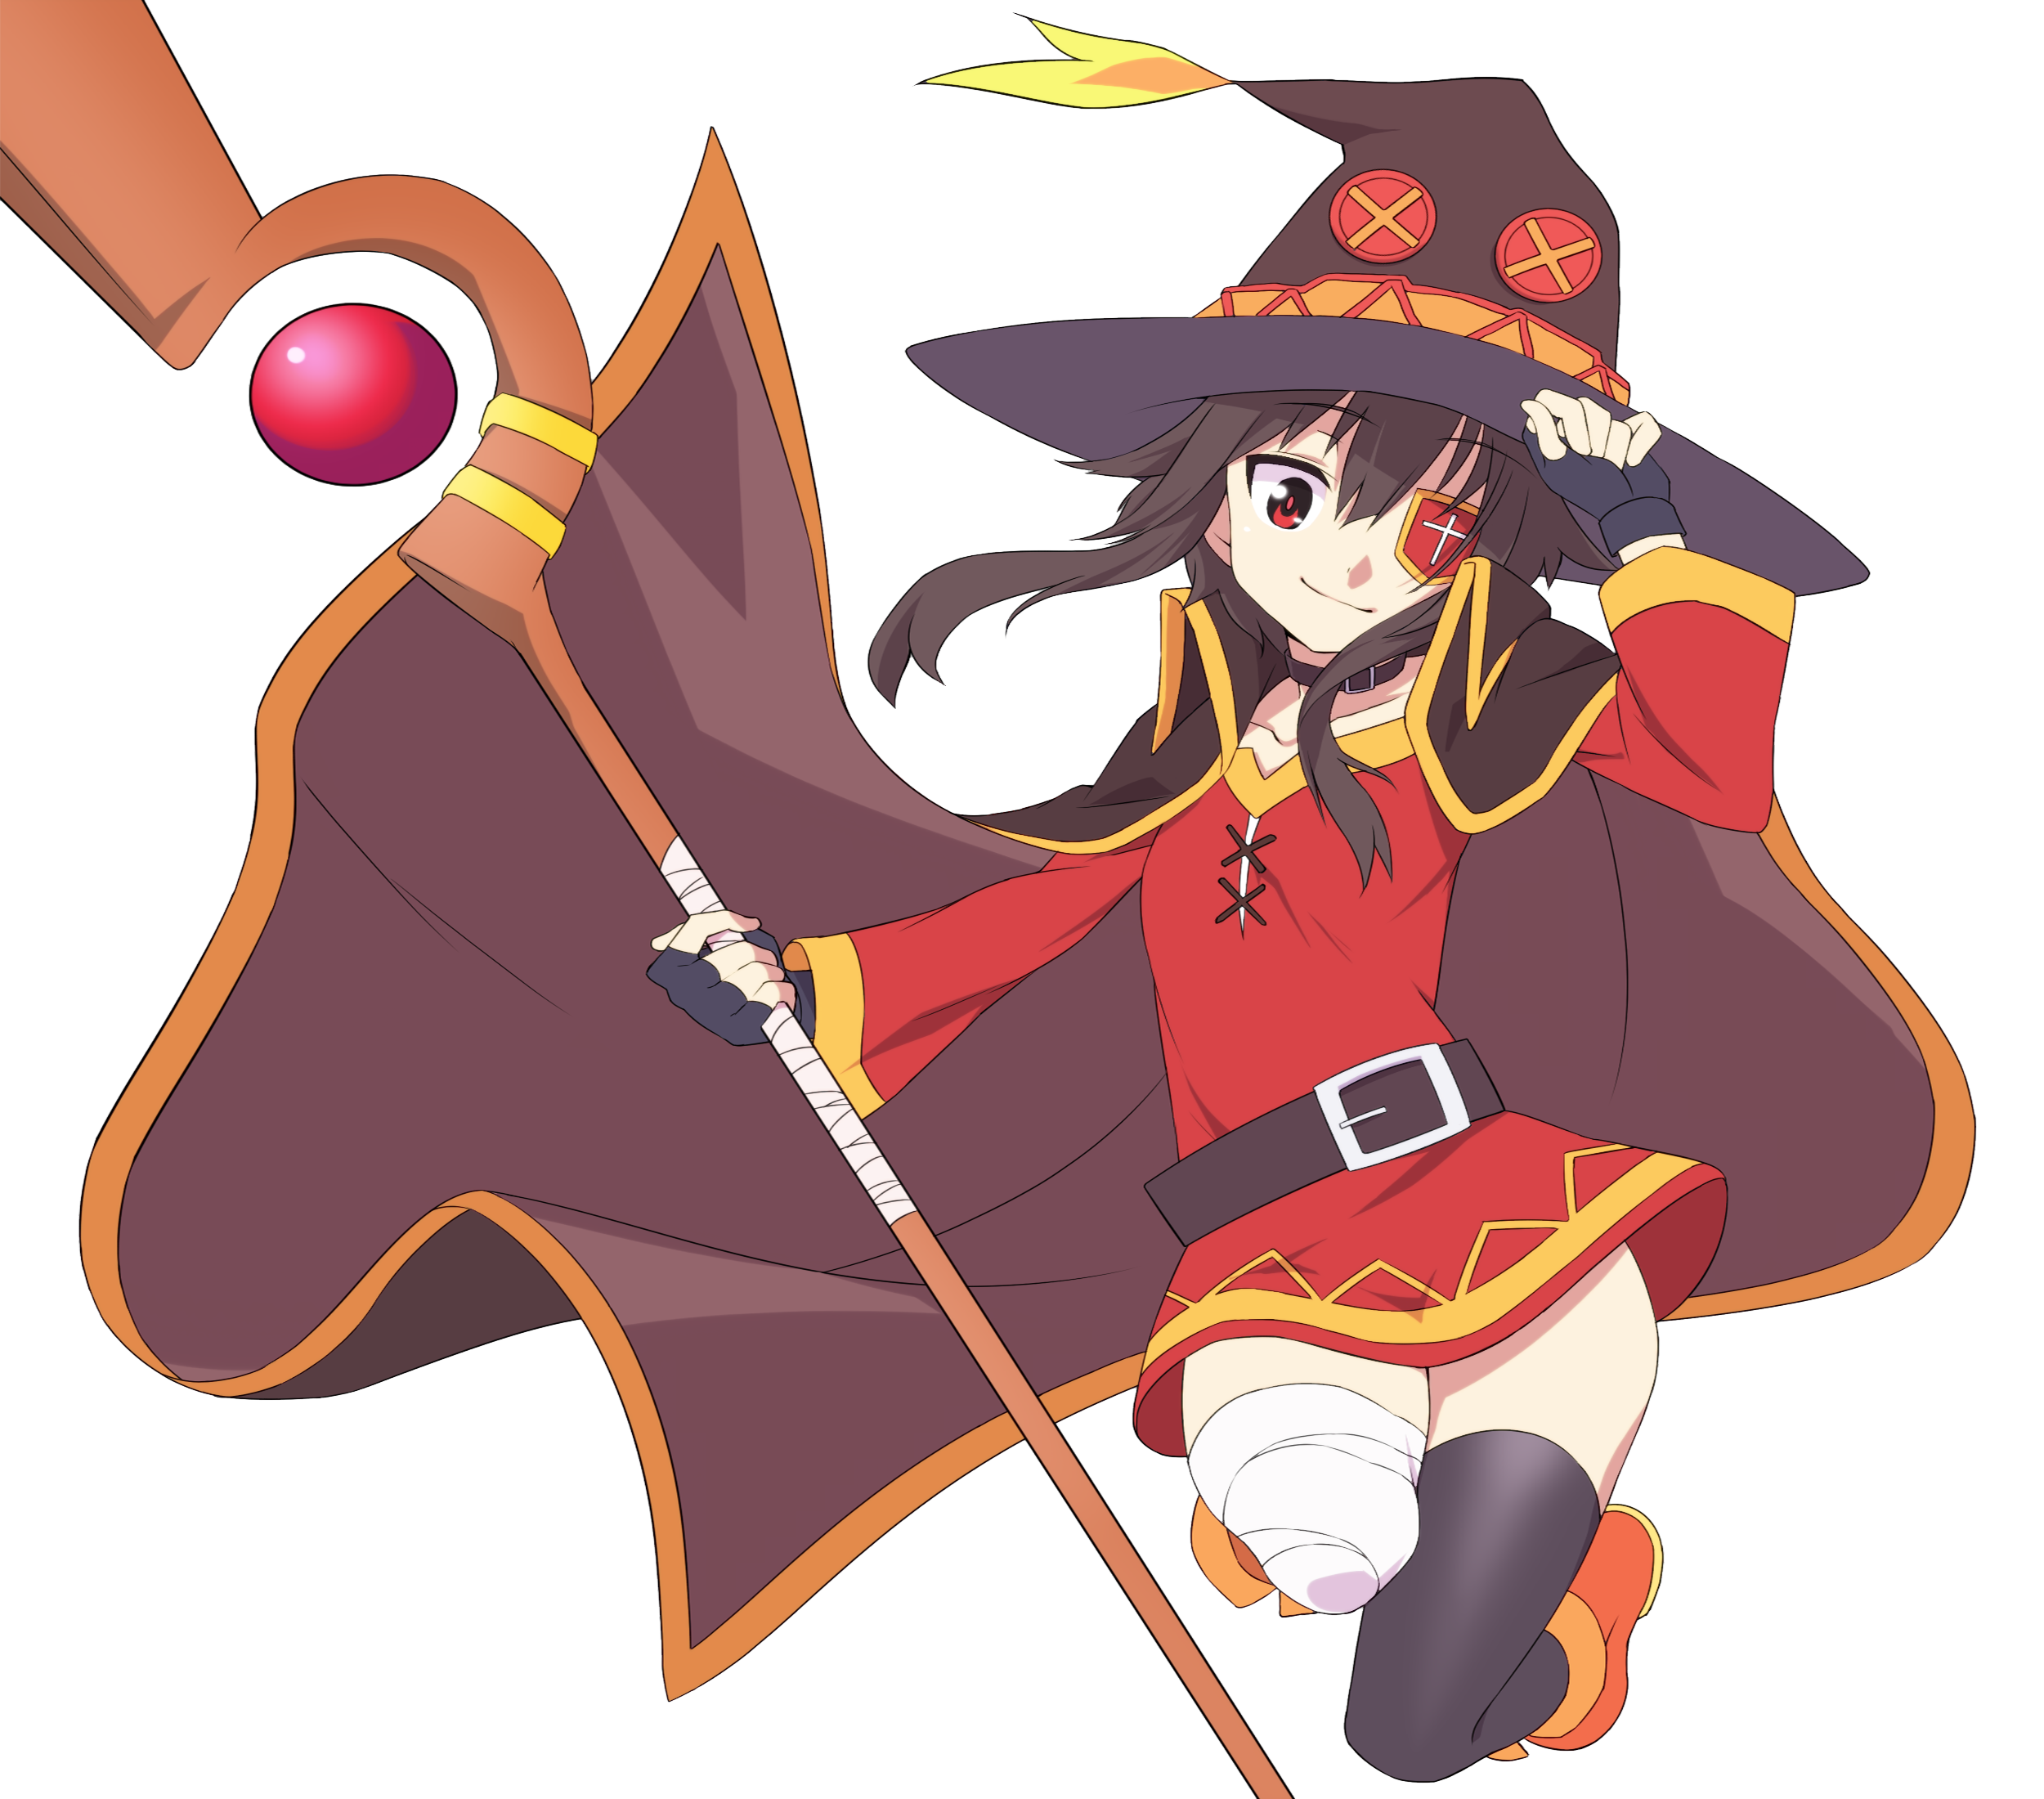 Megumin by 春鳩